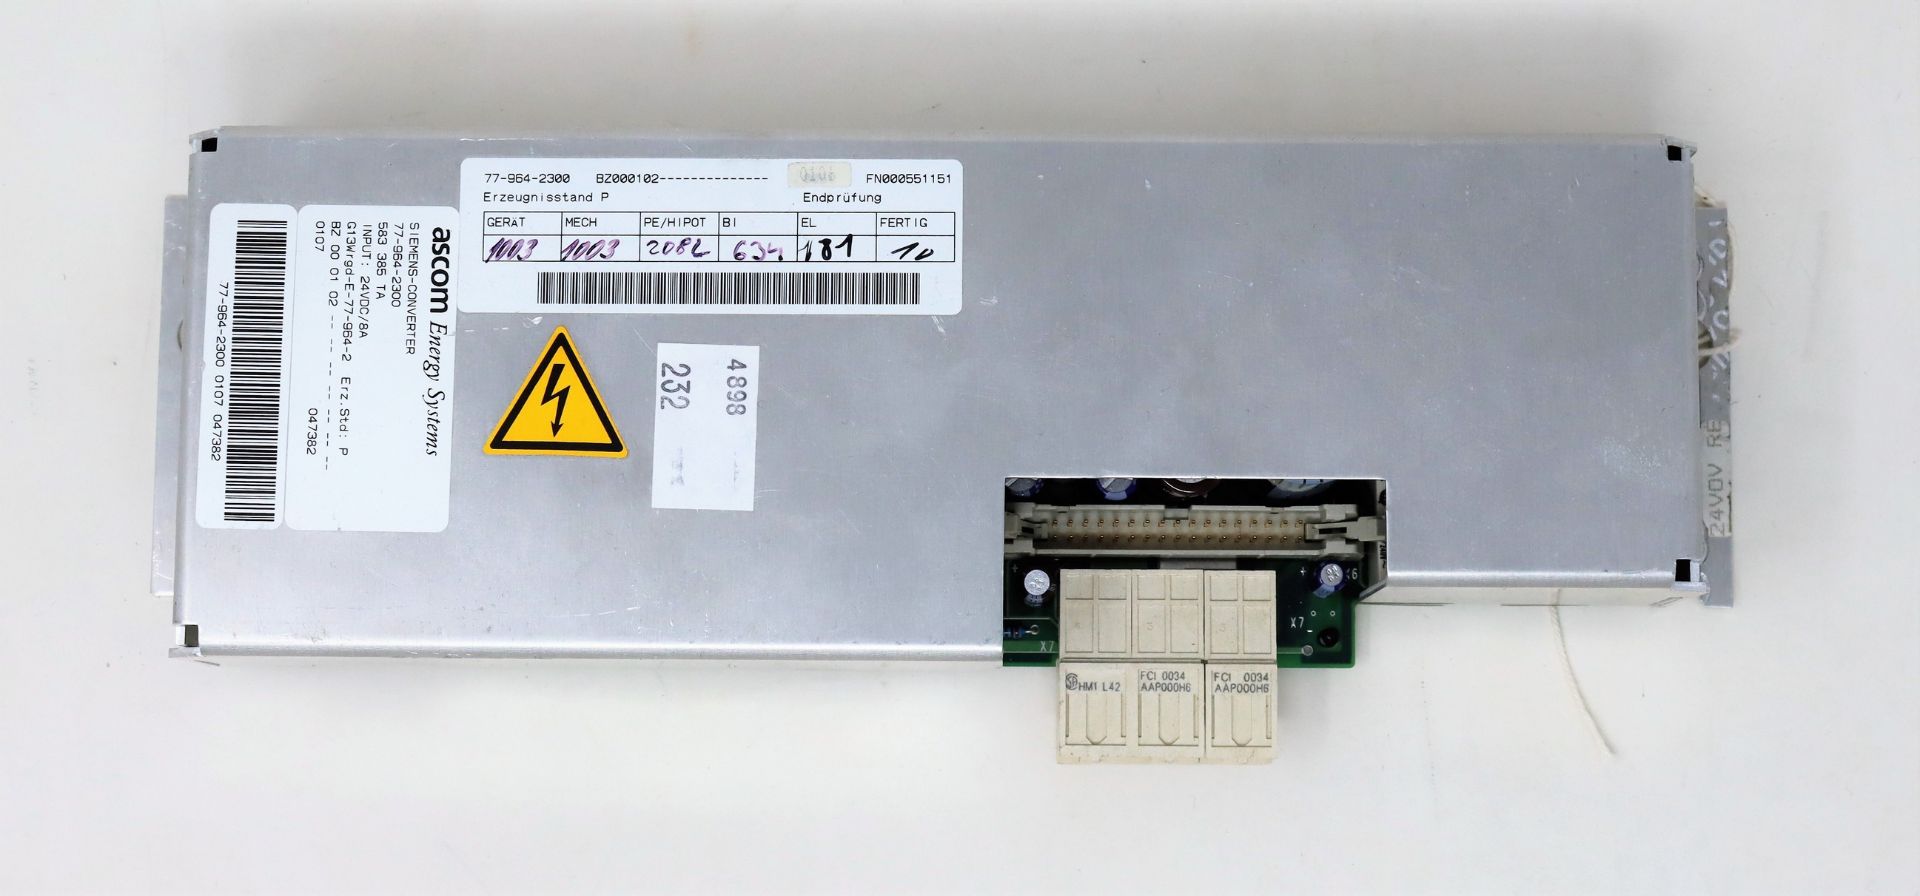 A pre-owned Siemens Ascom 77-964-2300 Converter Power Supply (Untested, sold as seen).